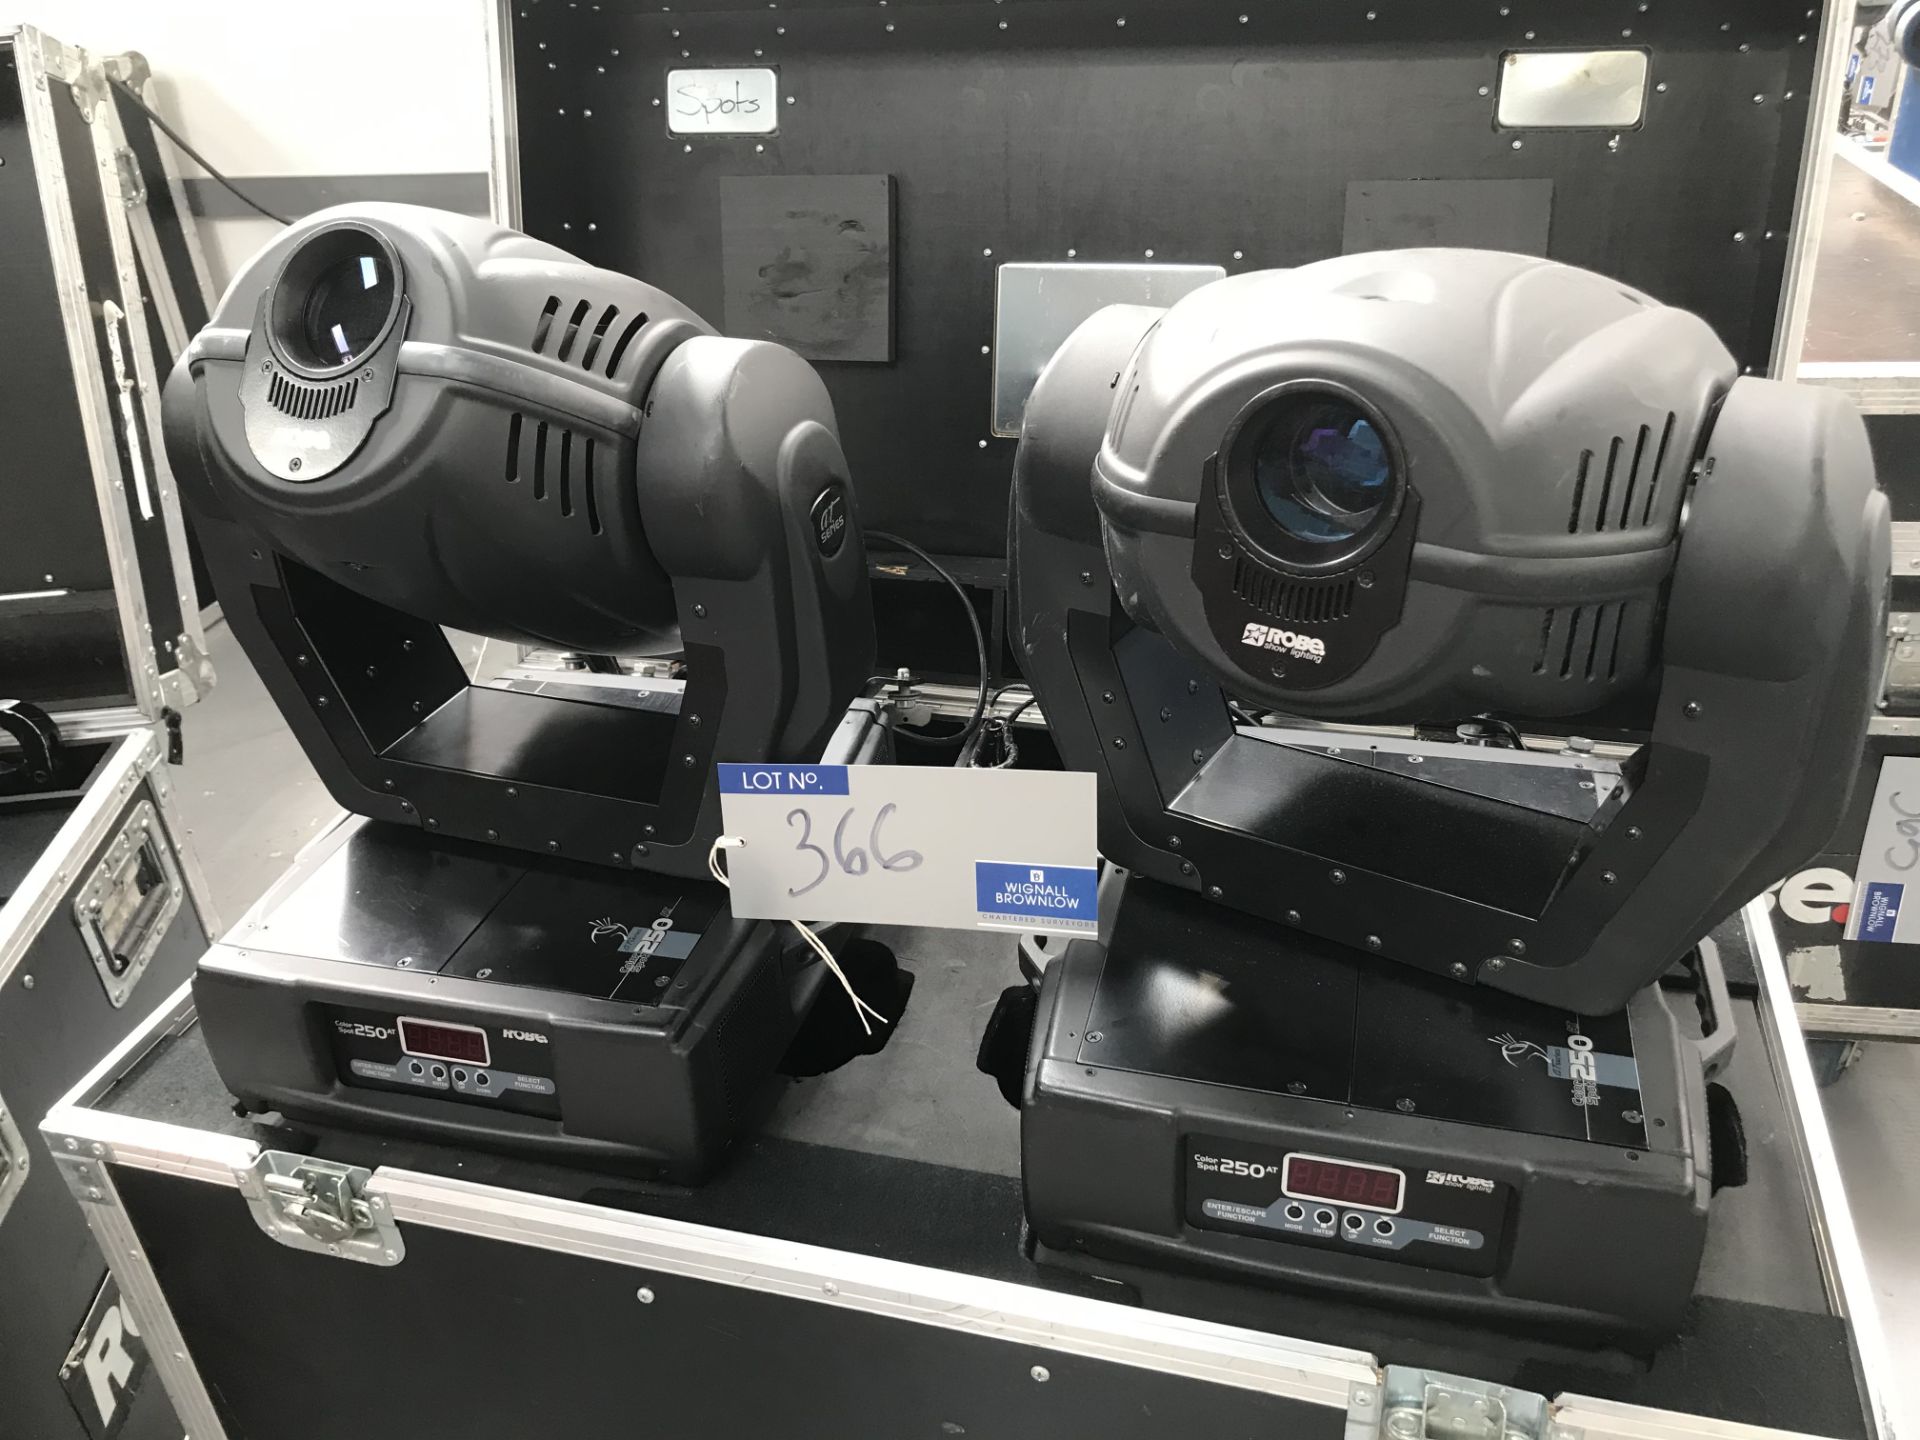 2 Robe AT Series Color Spot 250AT Moving Head Spotlights (recently serviced) with Clamps and